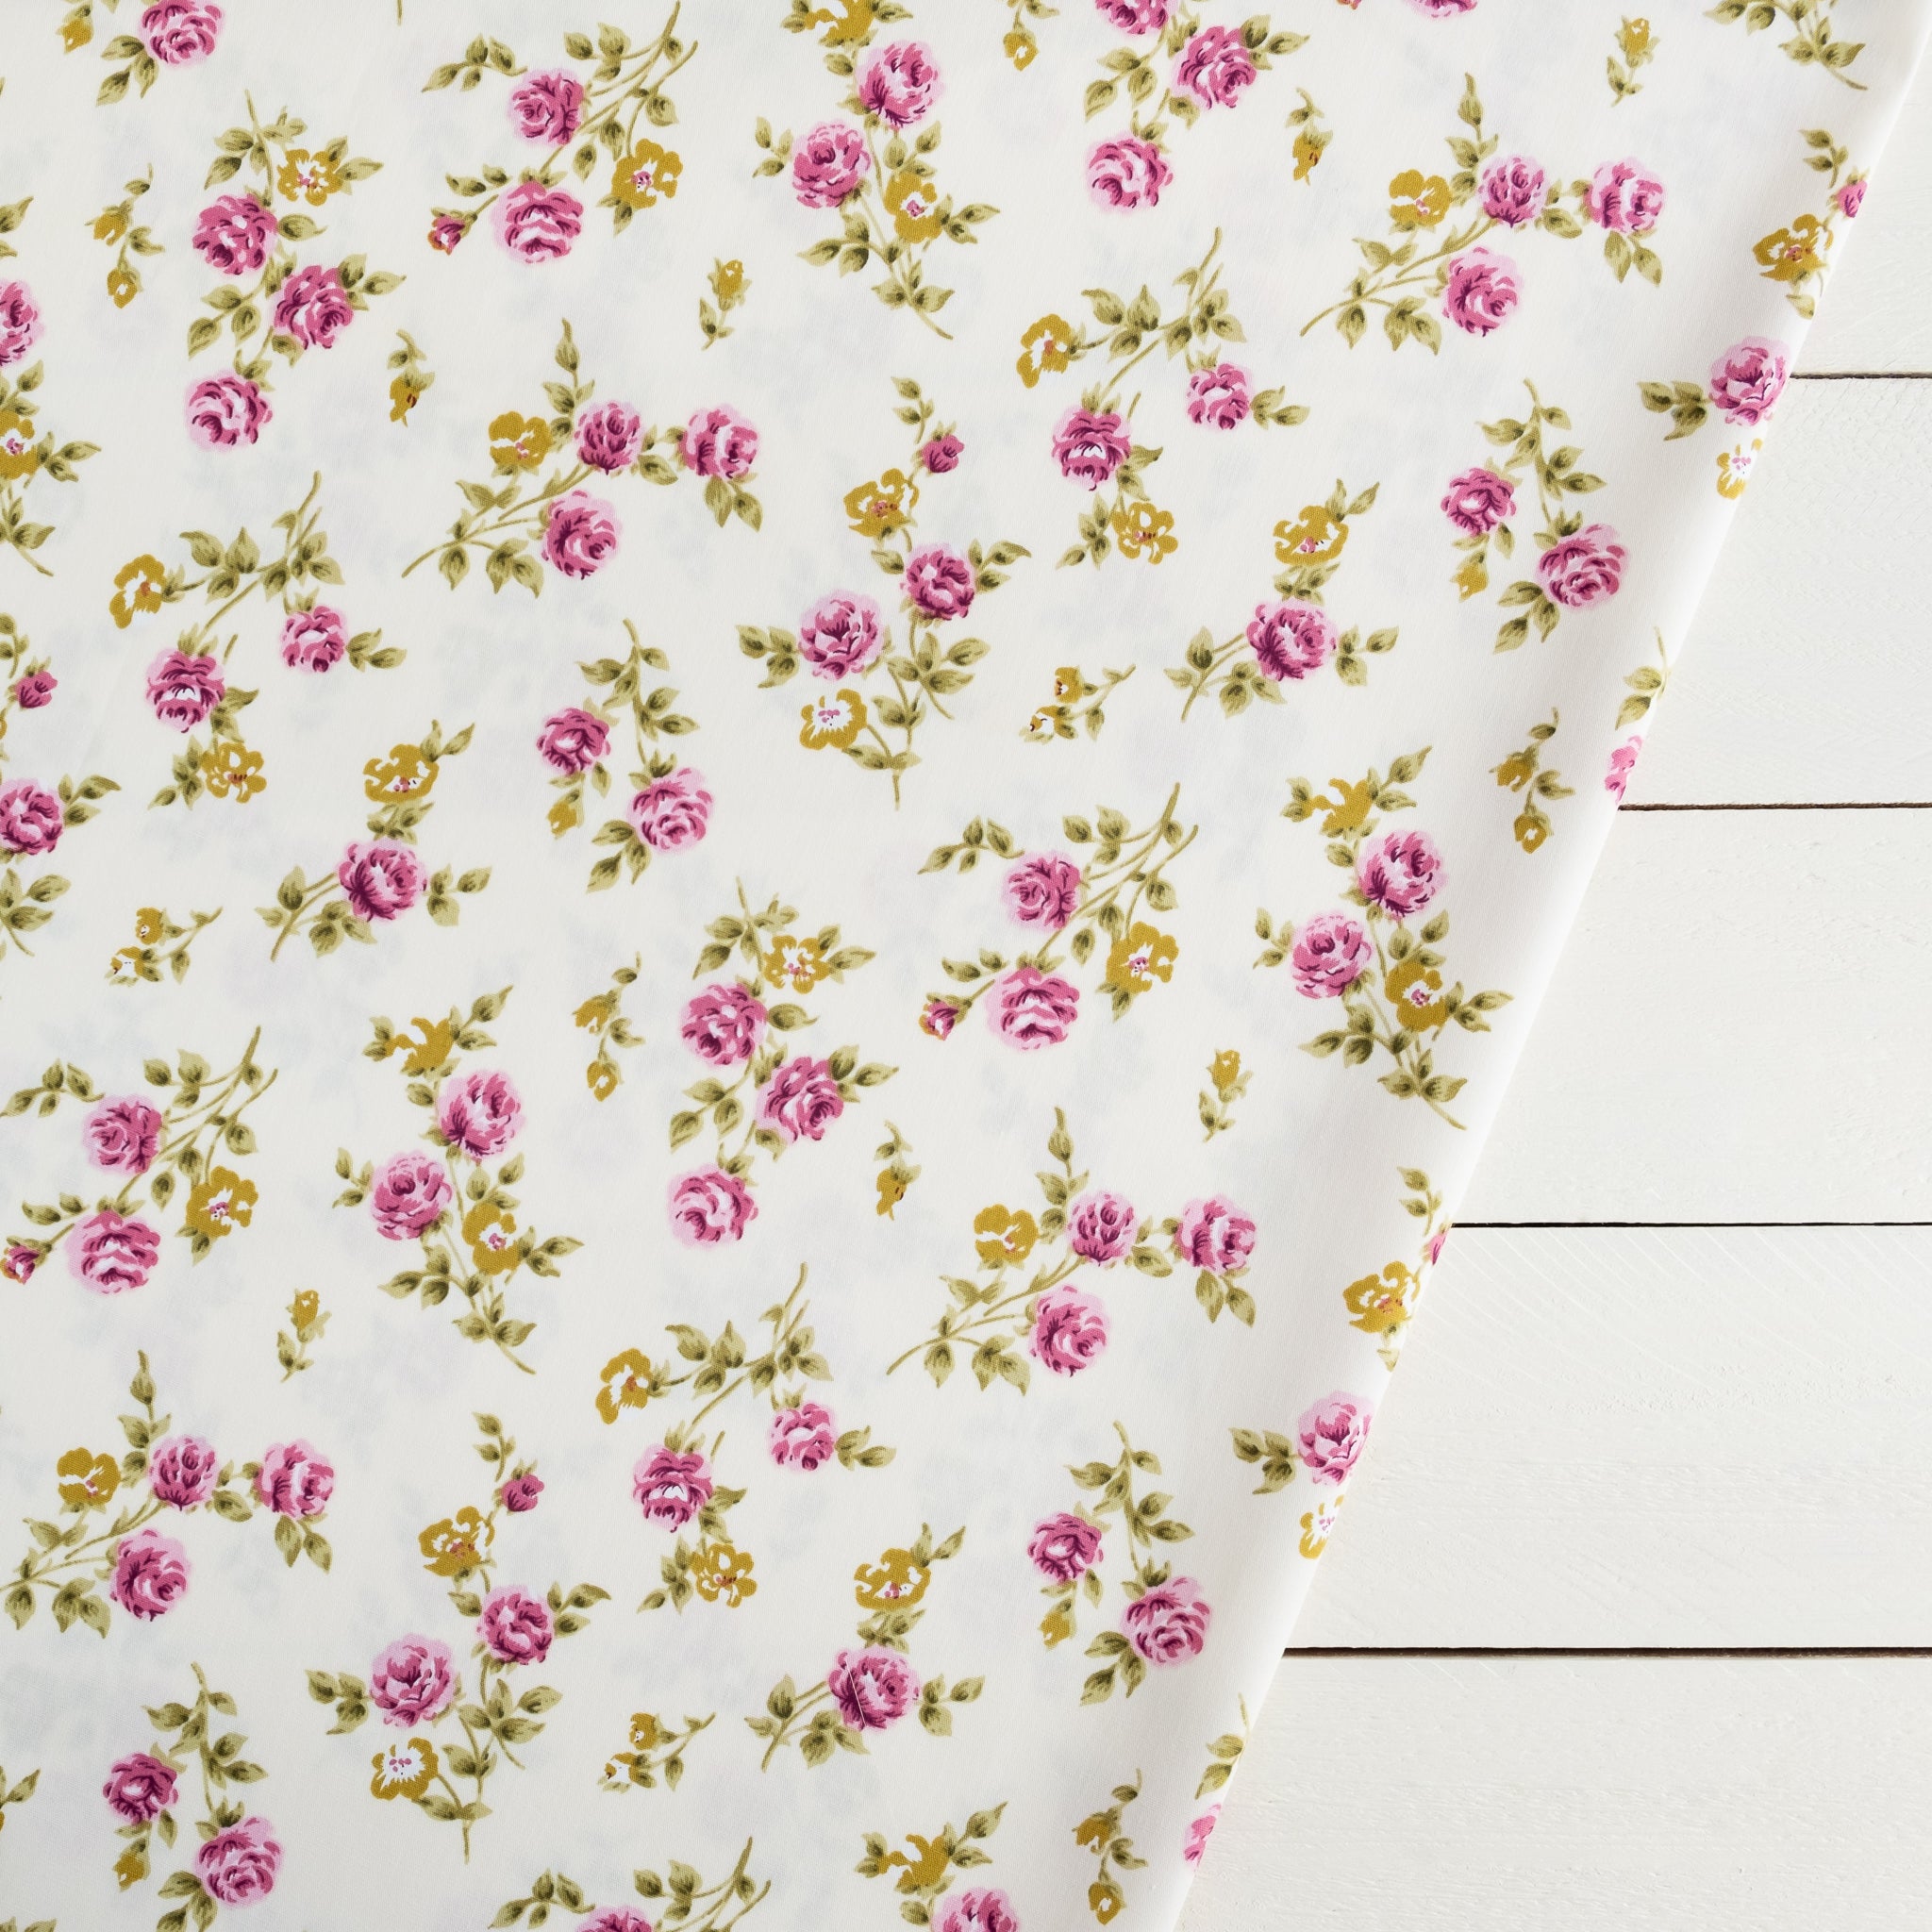 Cotton Fabric Pink Ditsy Floral Print on Cream Craft Fabric